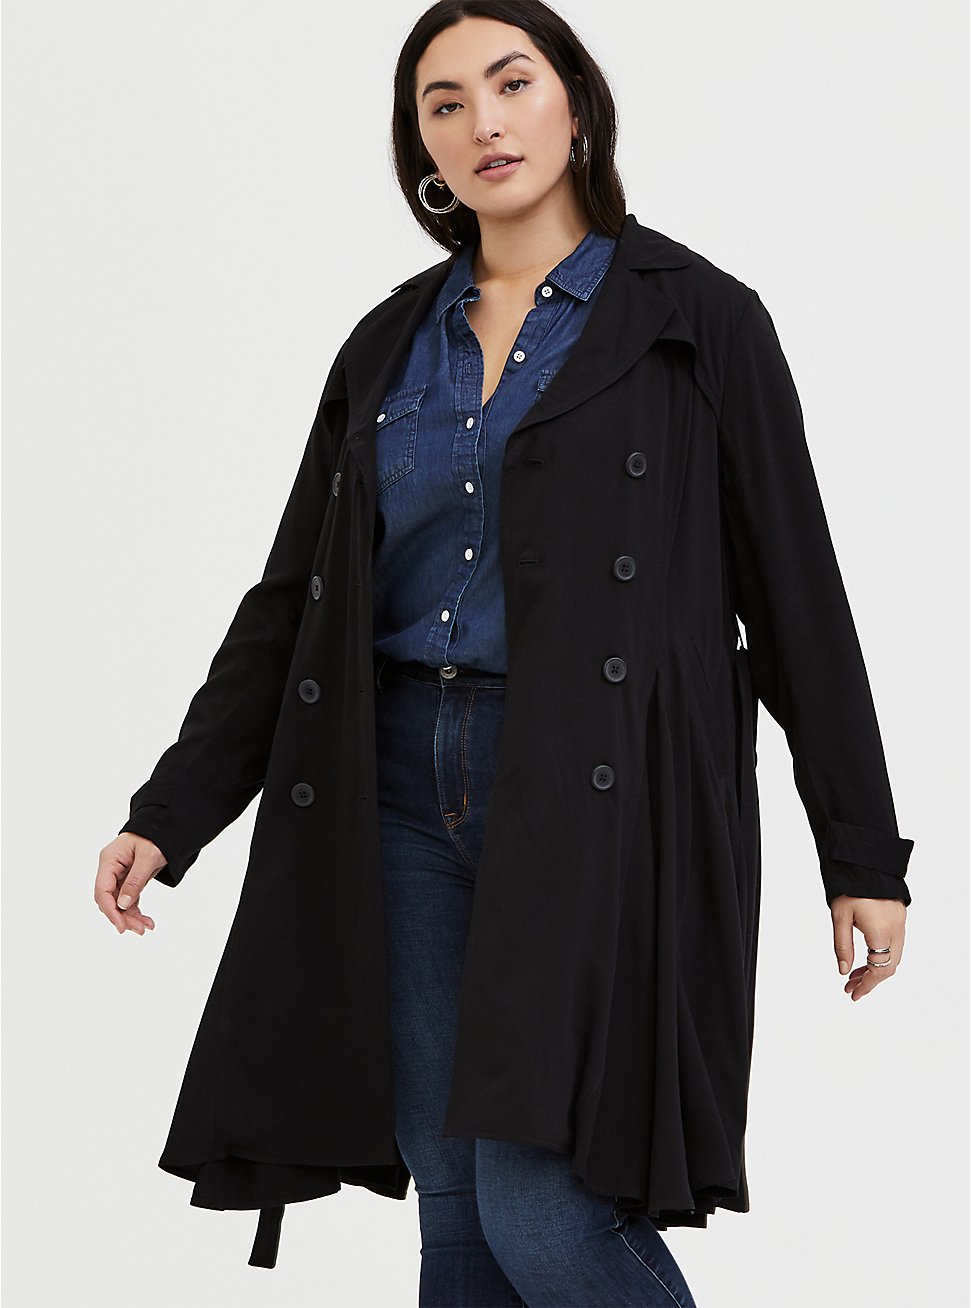 Plus Size - Black Twill Fit & Flare Trench Coat - Torrid